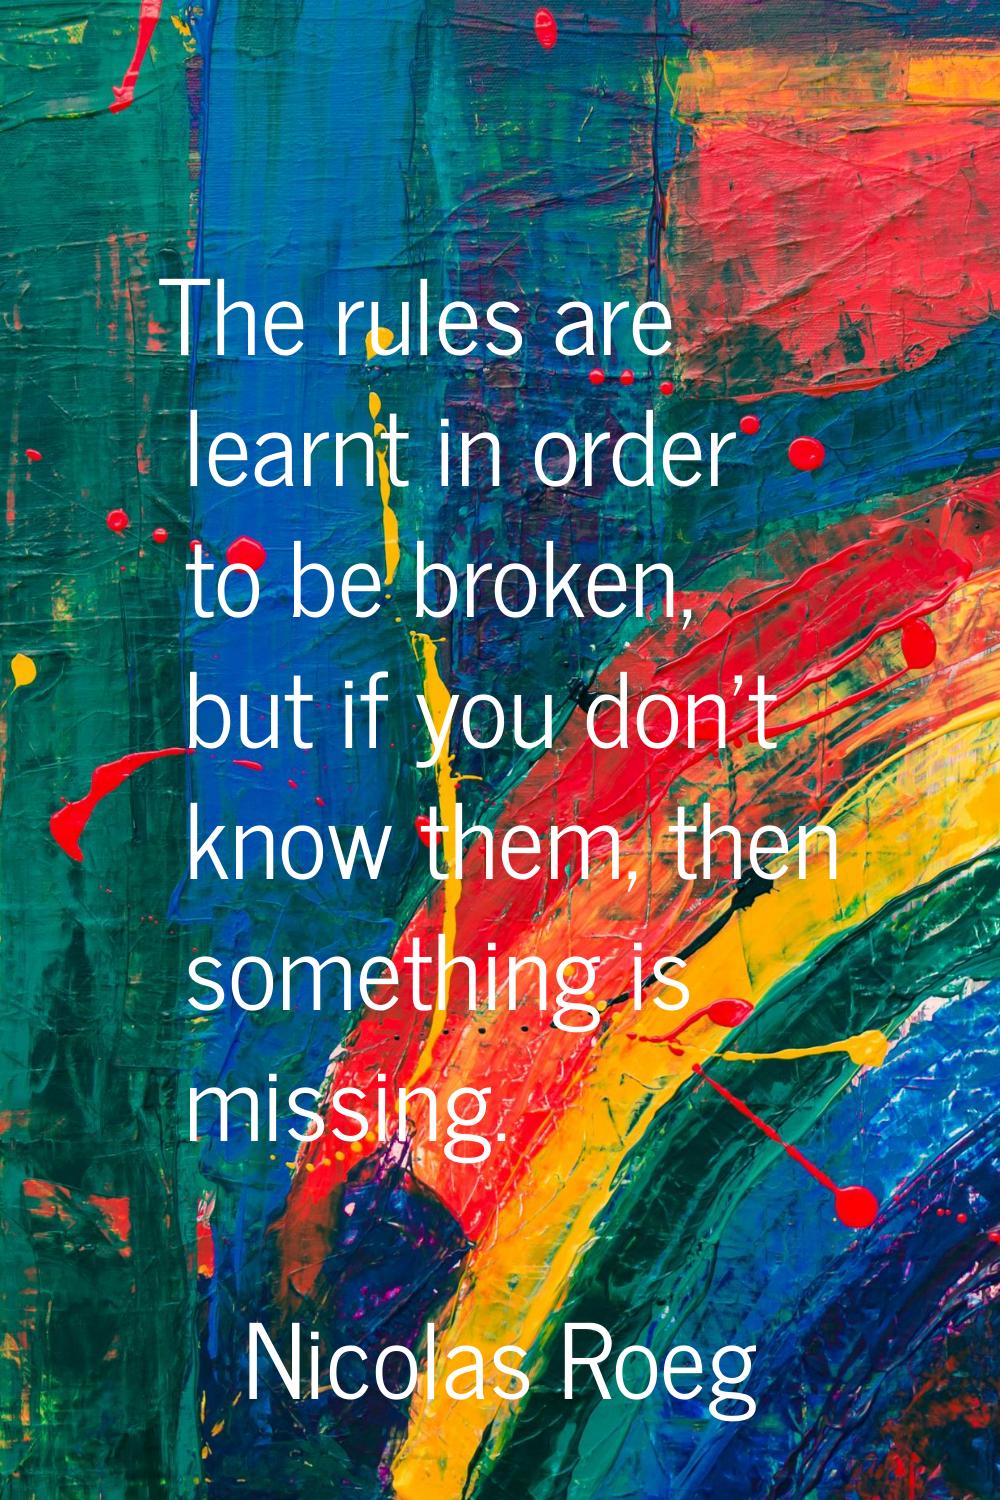 The rules are learnt in order to be broken, but if you don't know them, then something is missing.